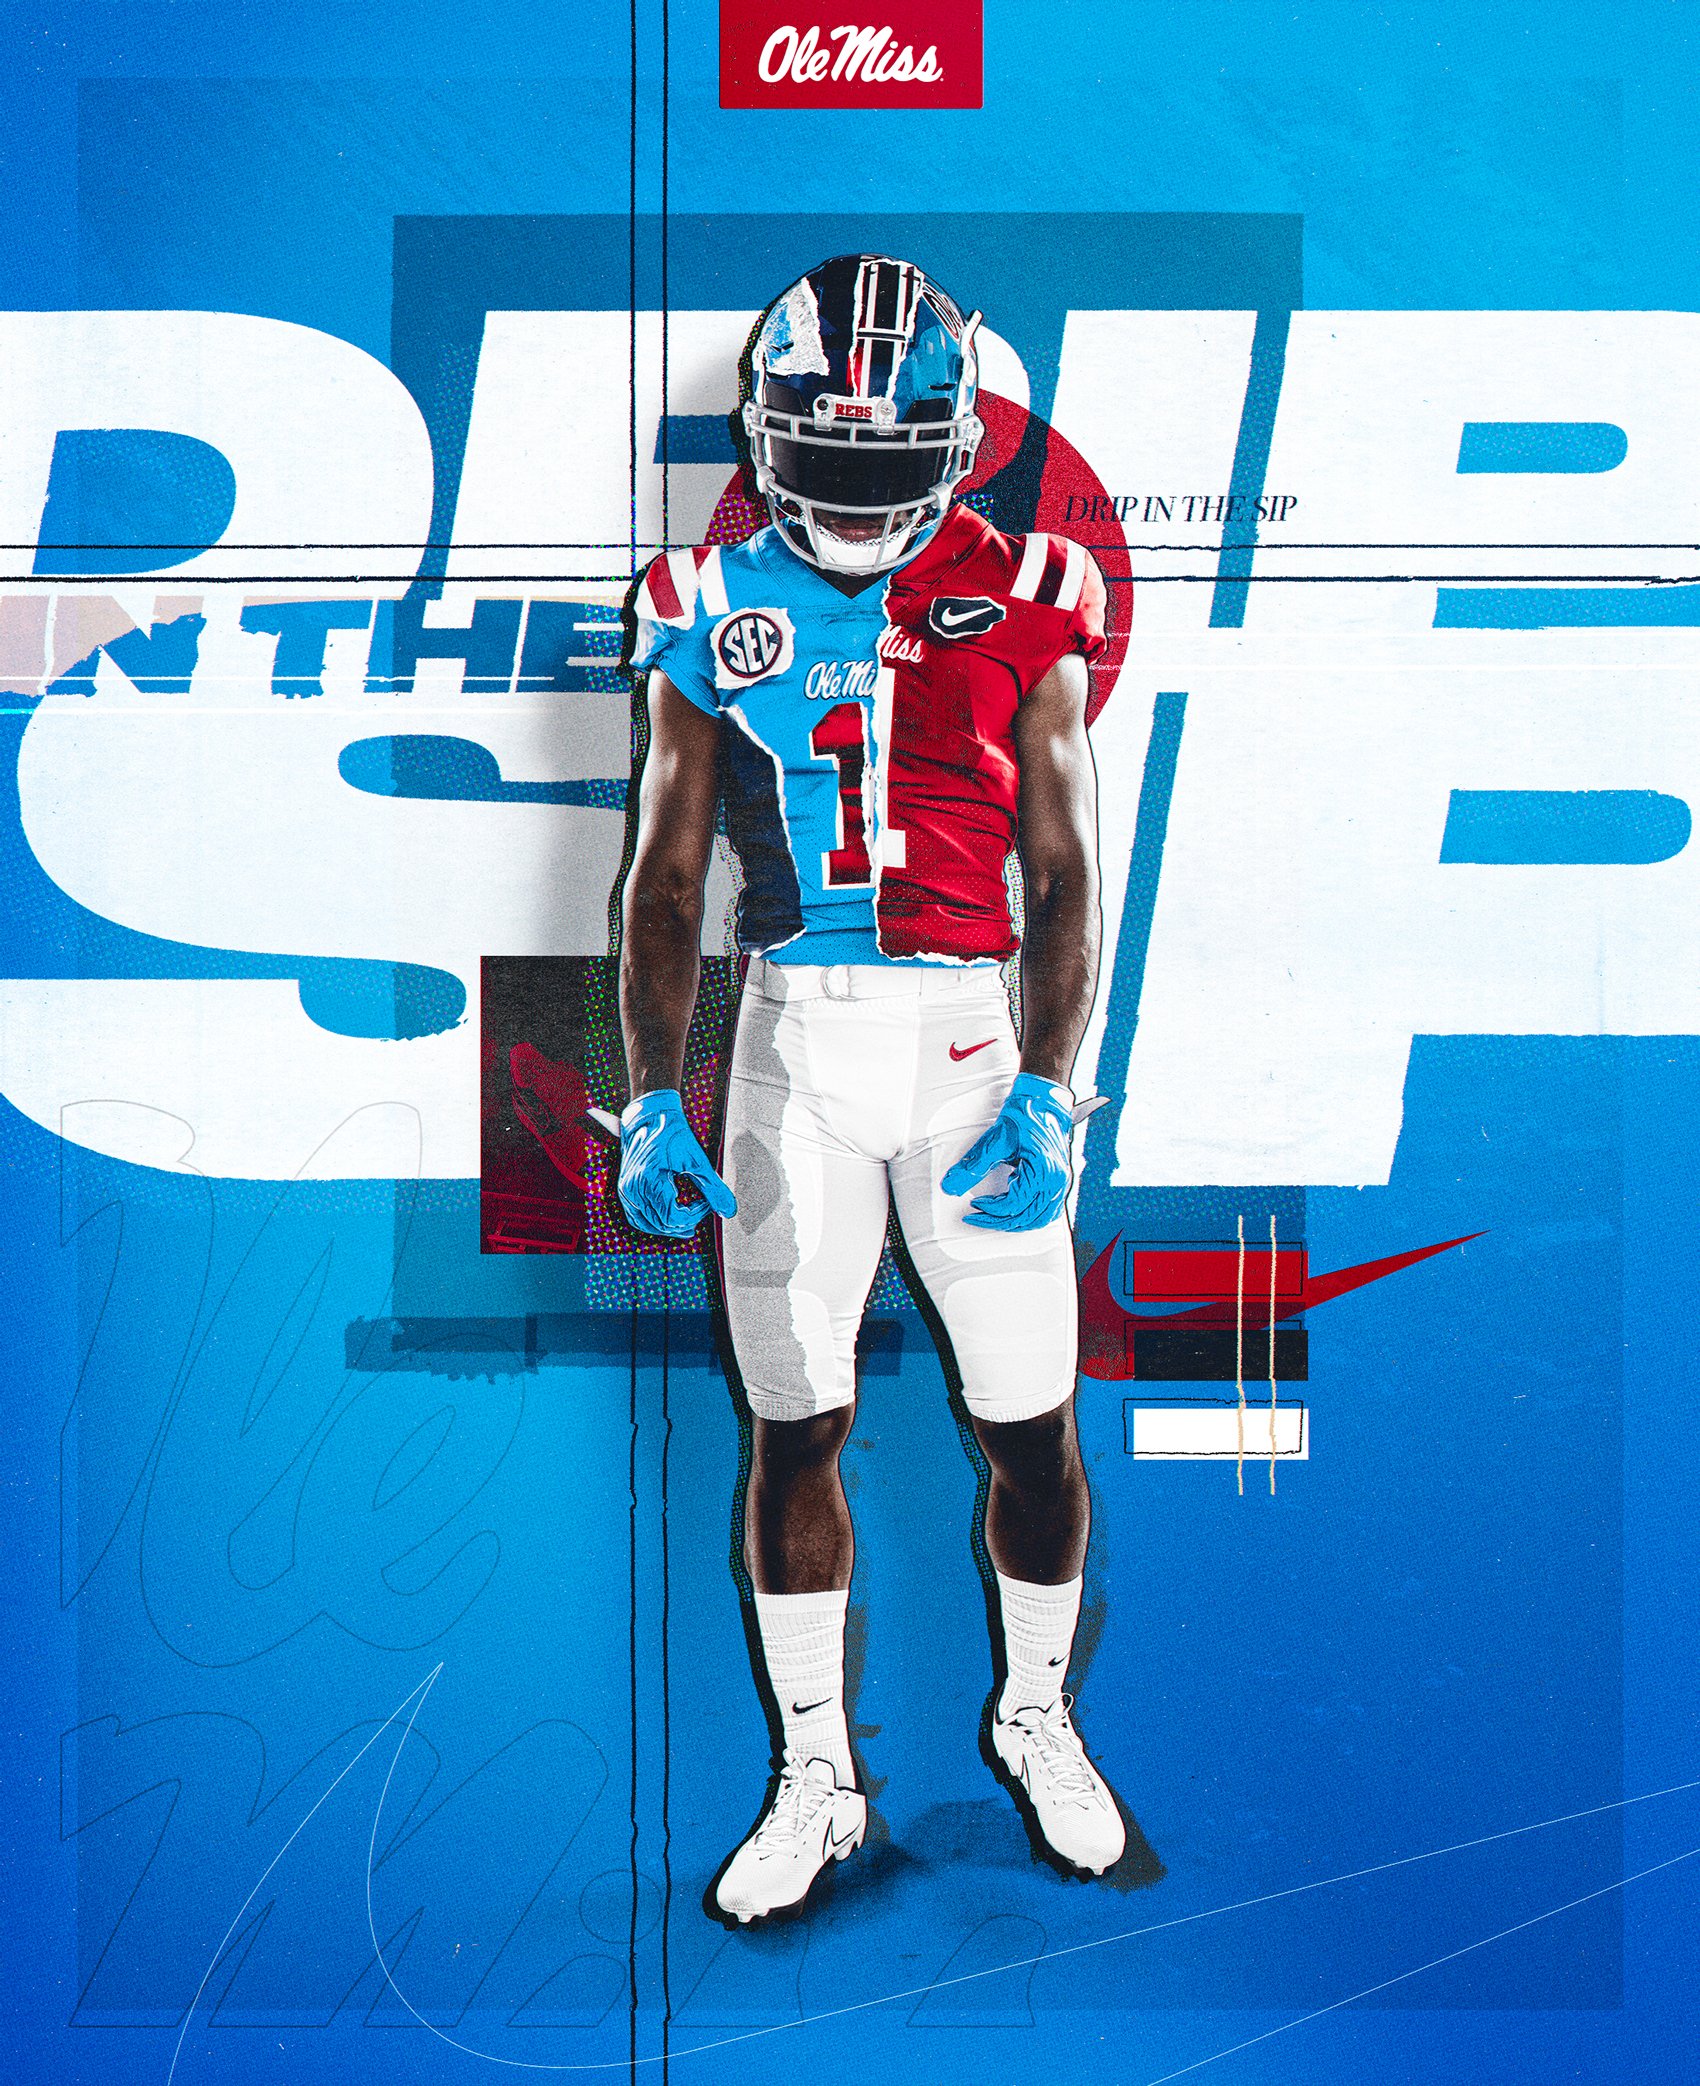 Ole Miss Football on X: The combinations are endless 💧 What's next?  #DripInTheSip  / X